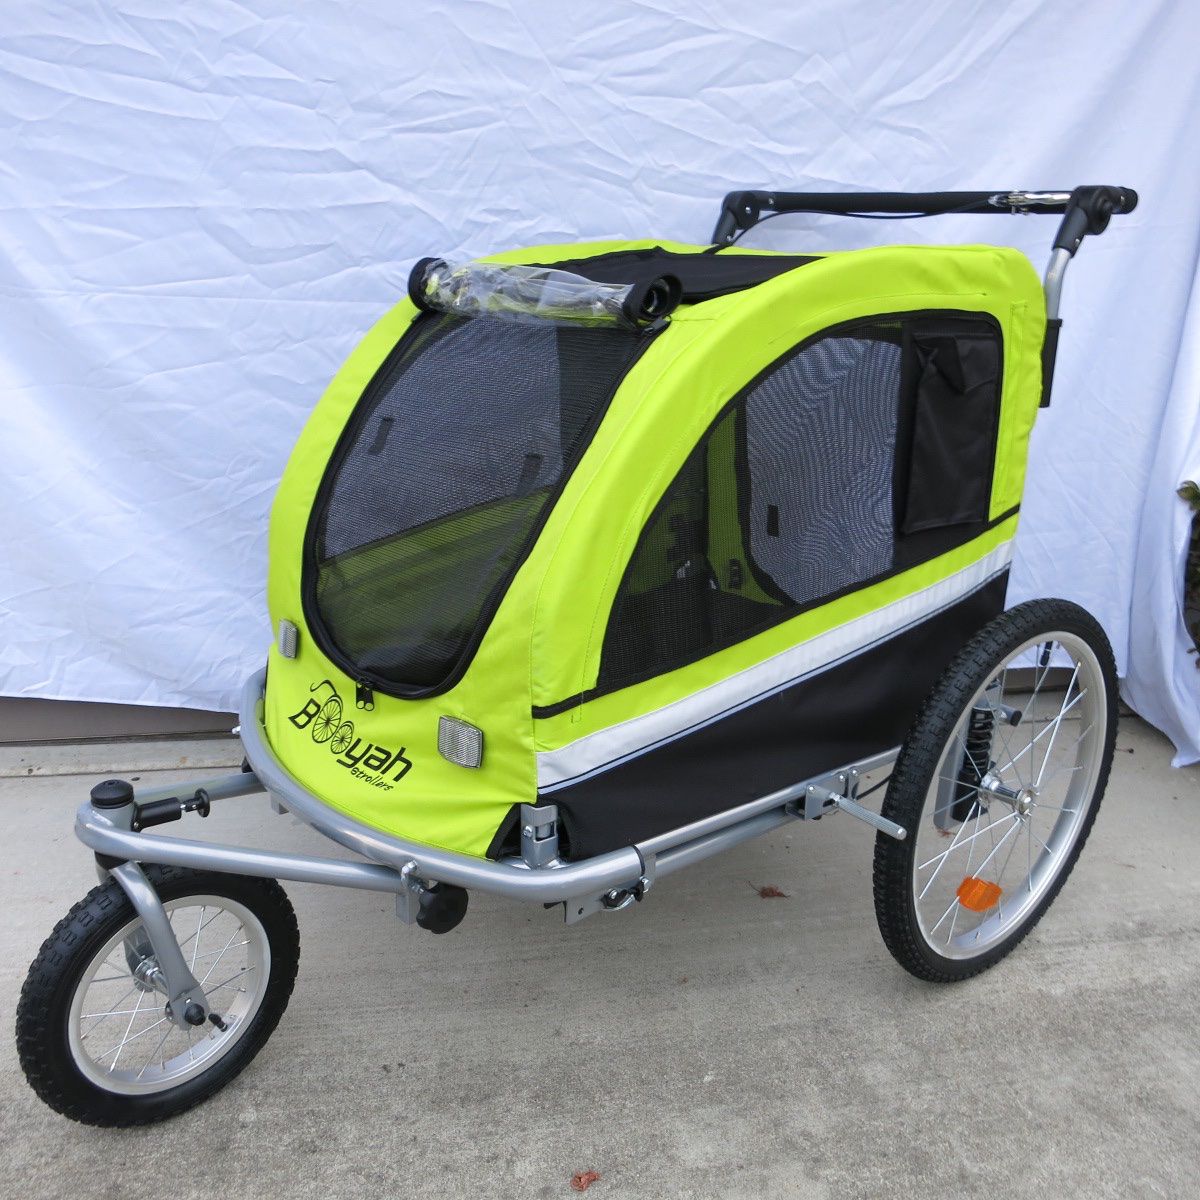 New Booyah’s large pet dog stroller and Bike Trailer. Price Is Firm.